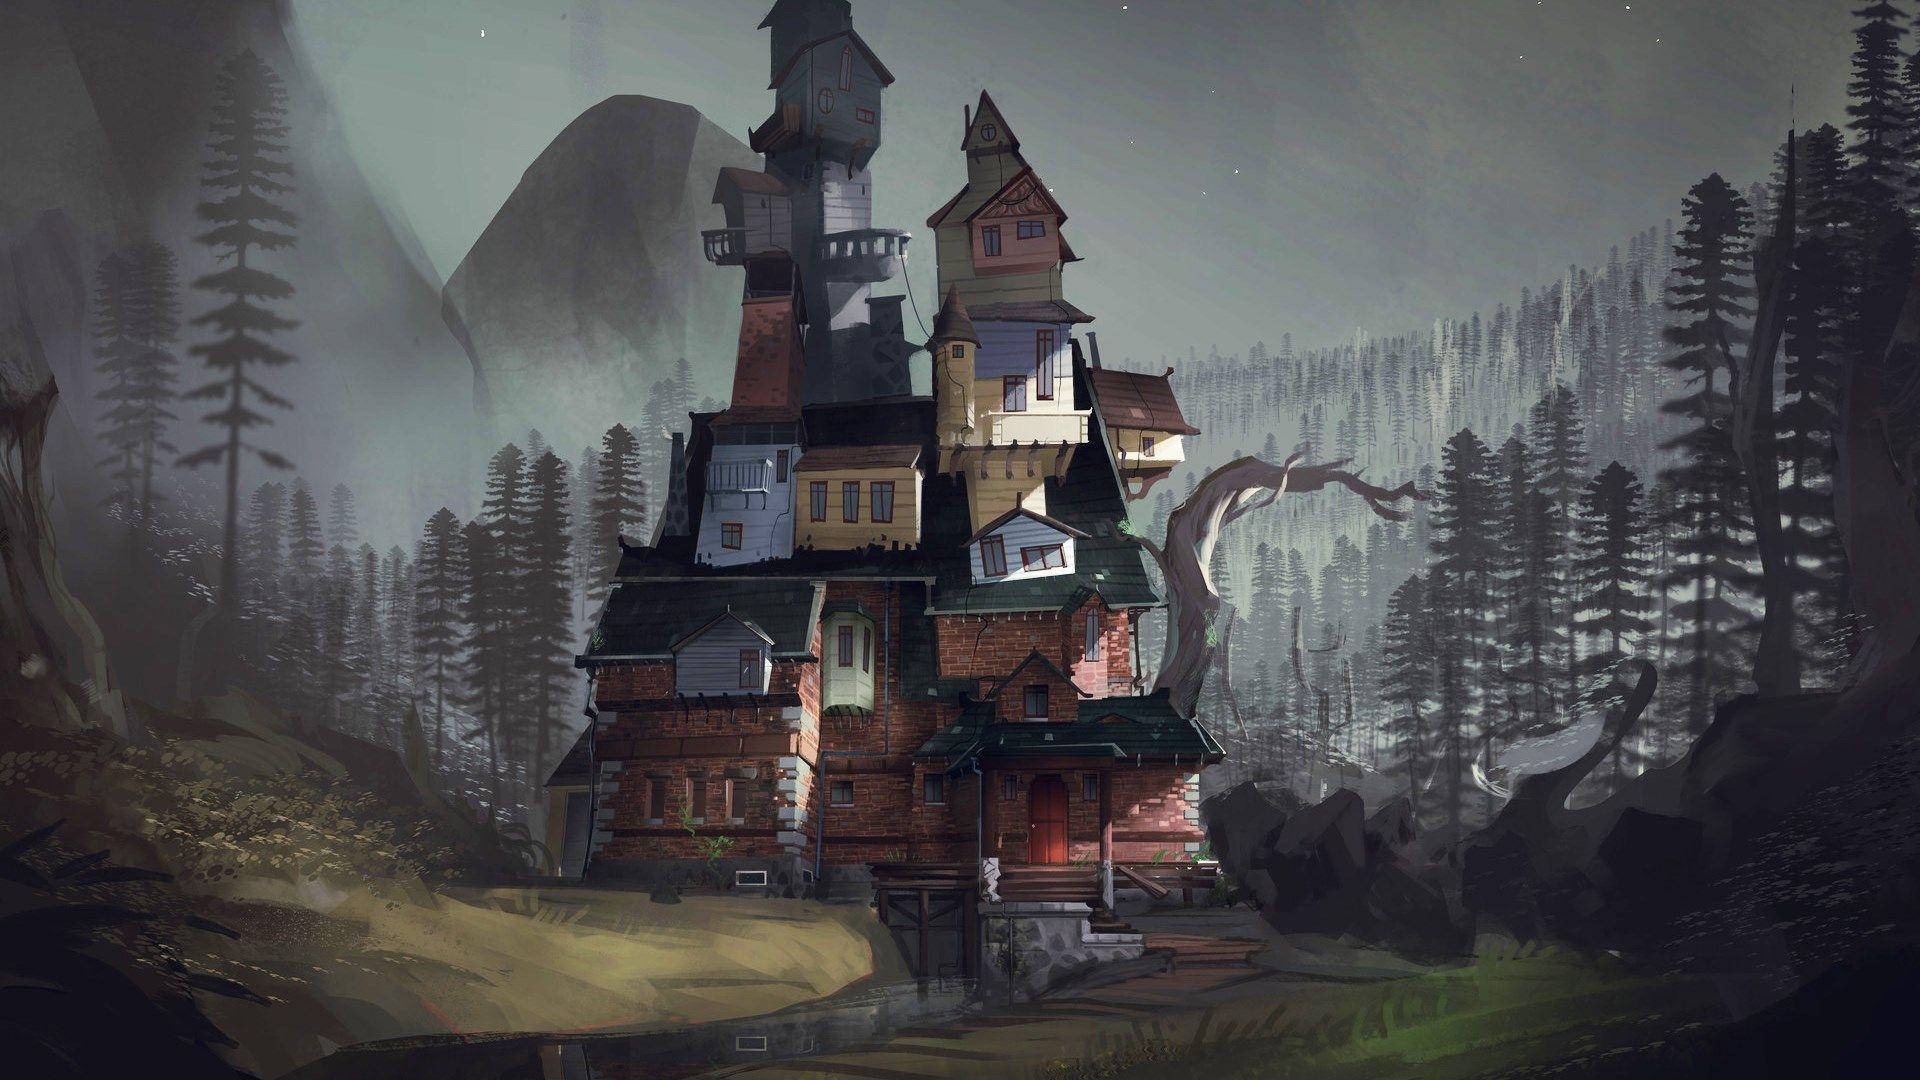 What Remains of Edith Finch is free on the Epic Games Store